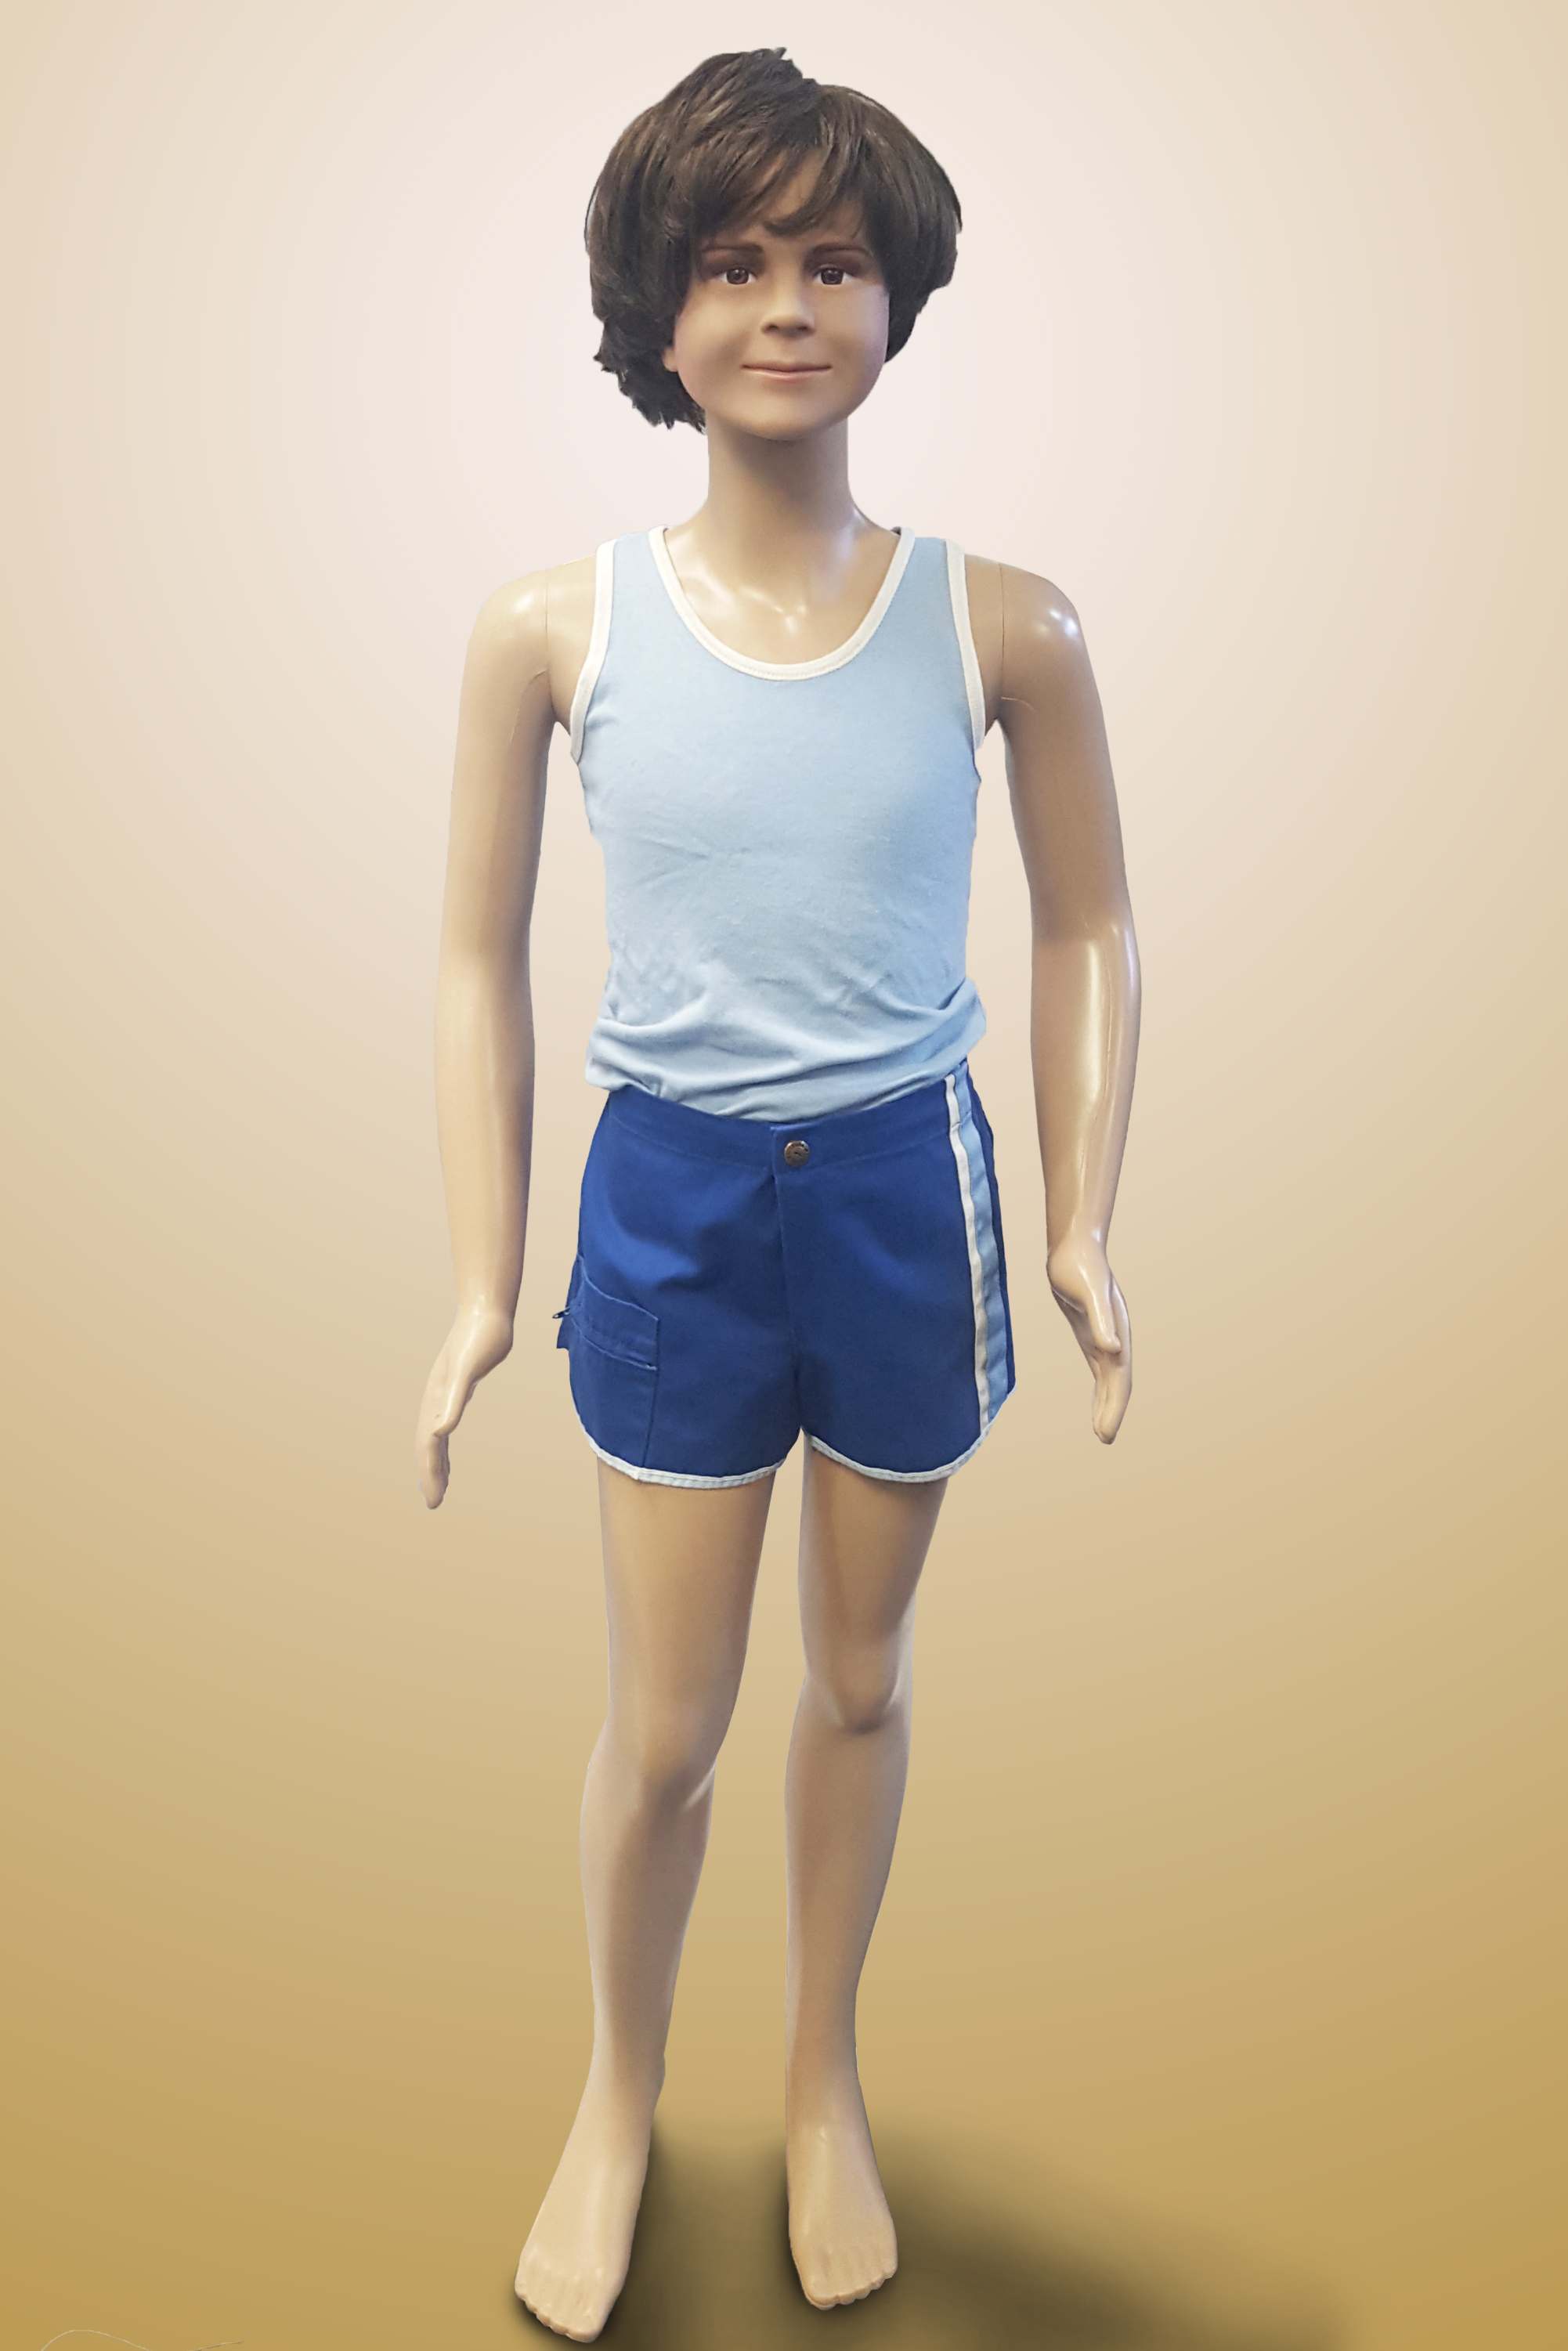 Boy in Singlet and Shorts